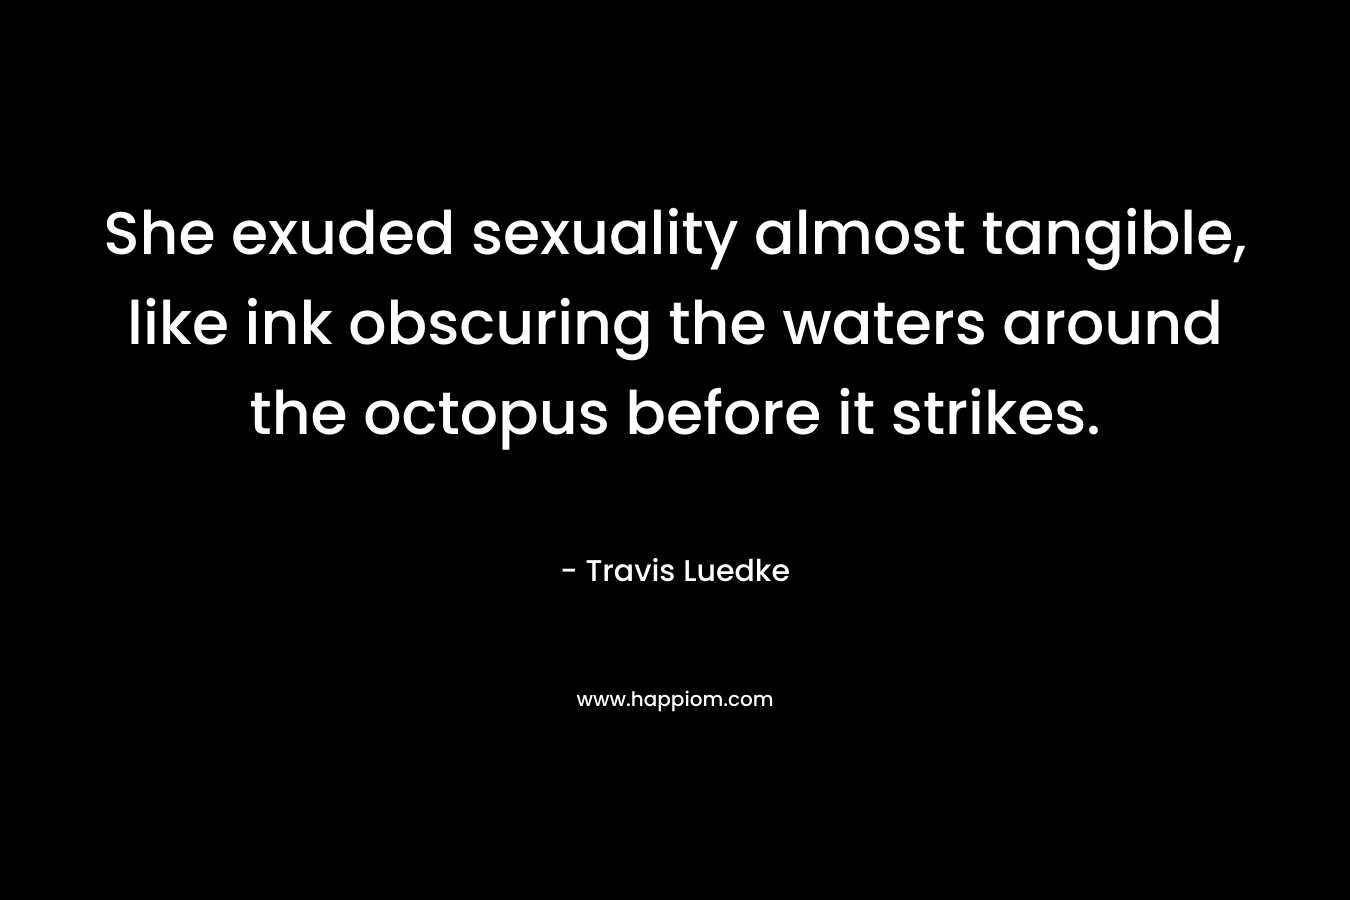 She exuded sexuality almost tangible, like ink obscuring the waters around the octopus before it strikes. – Travis Luedke